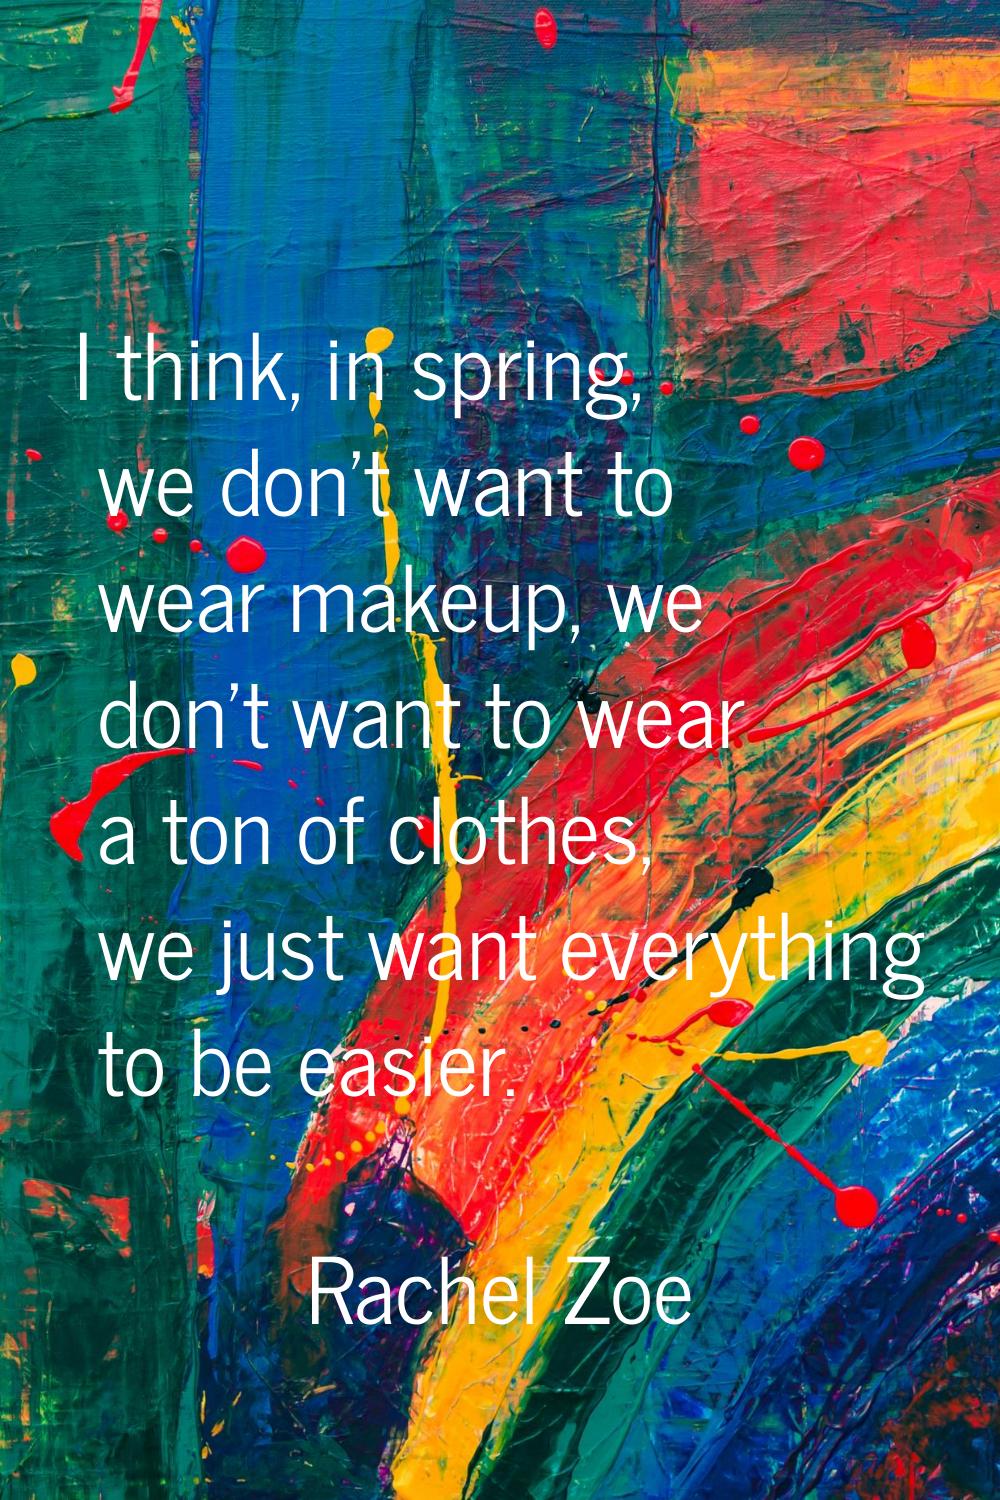 I think, in spring, we don't want to wear makeup, we don't want to wear a ton of clothes, we just w